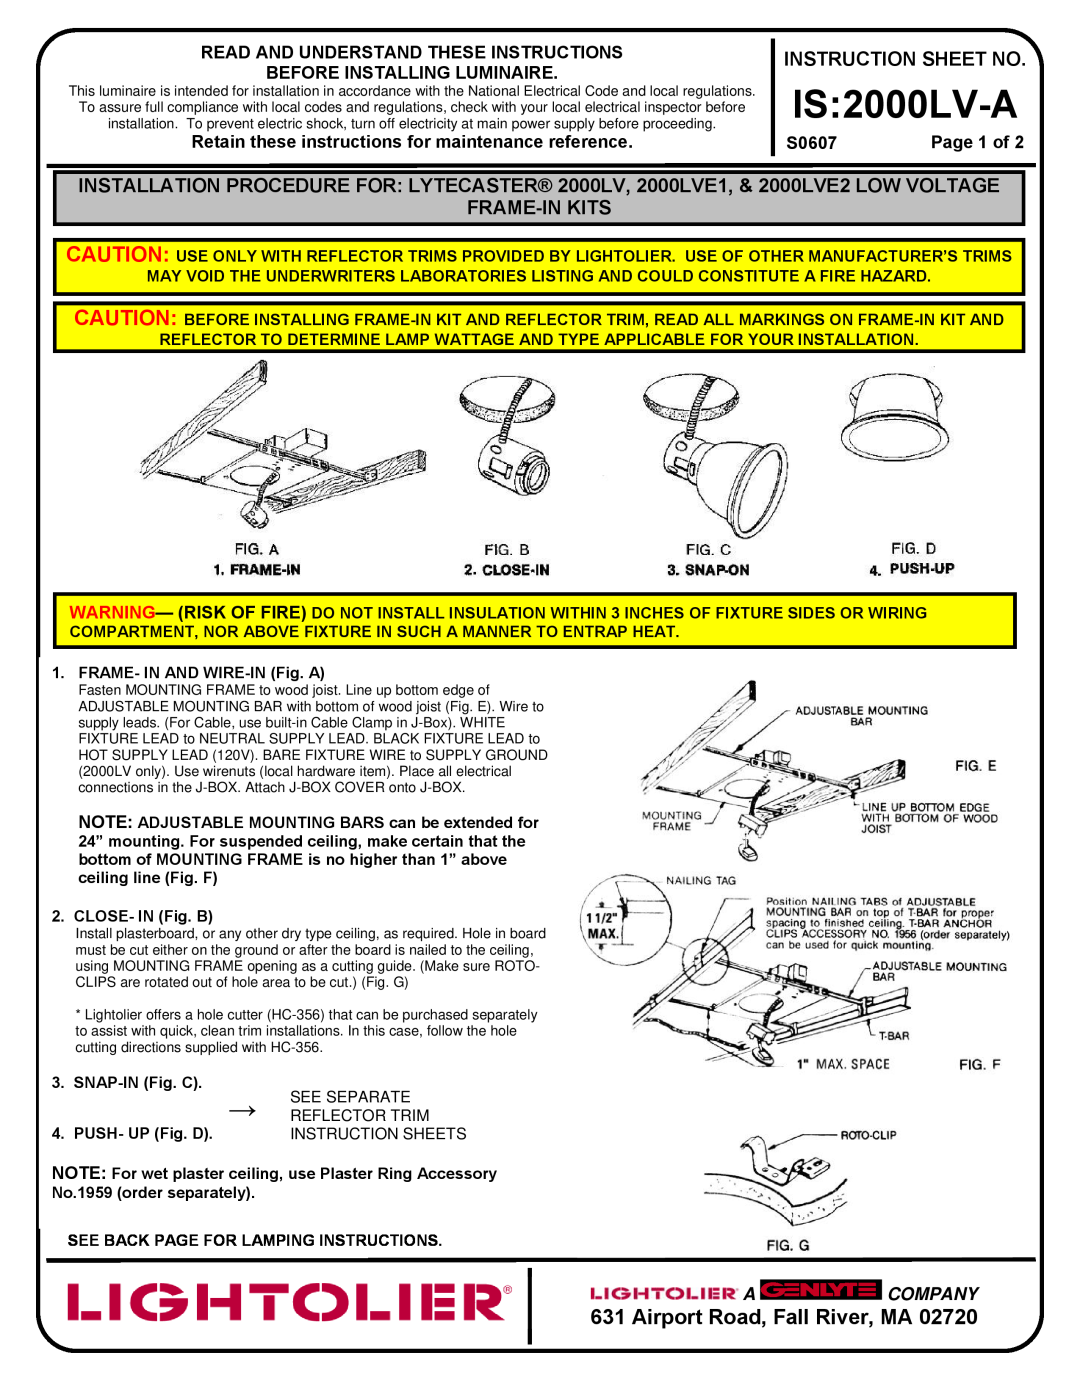 Lightolier IS:2000LV-A instruction sheet IS 2000LV-A, Airport Road, Fall River, MA, Frame-Inkits, S0607, Page 1 of 